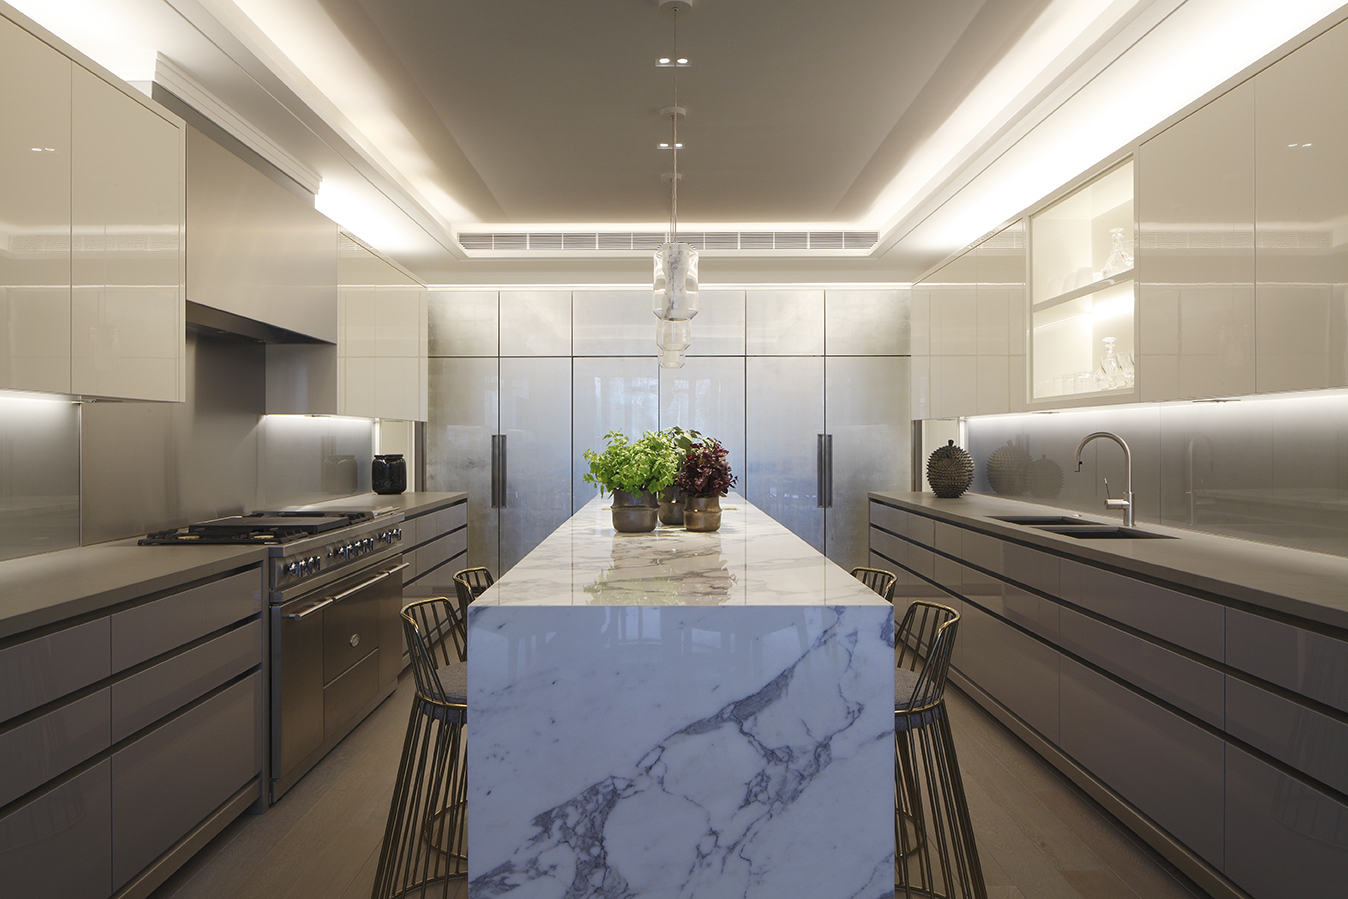 Kitchen ceiling and cabinet lighting in a modern grey kitchen with marble surfaces.